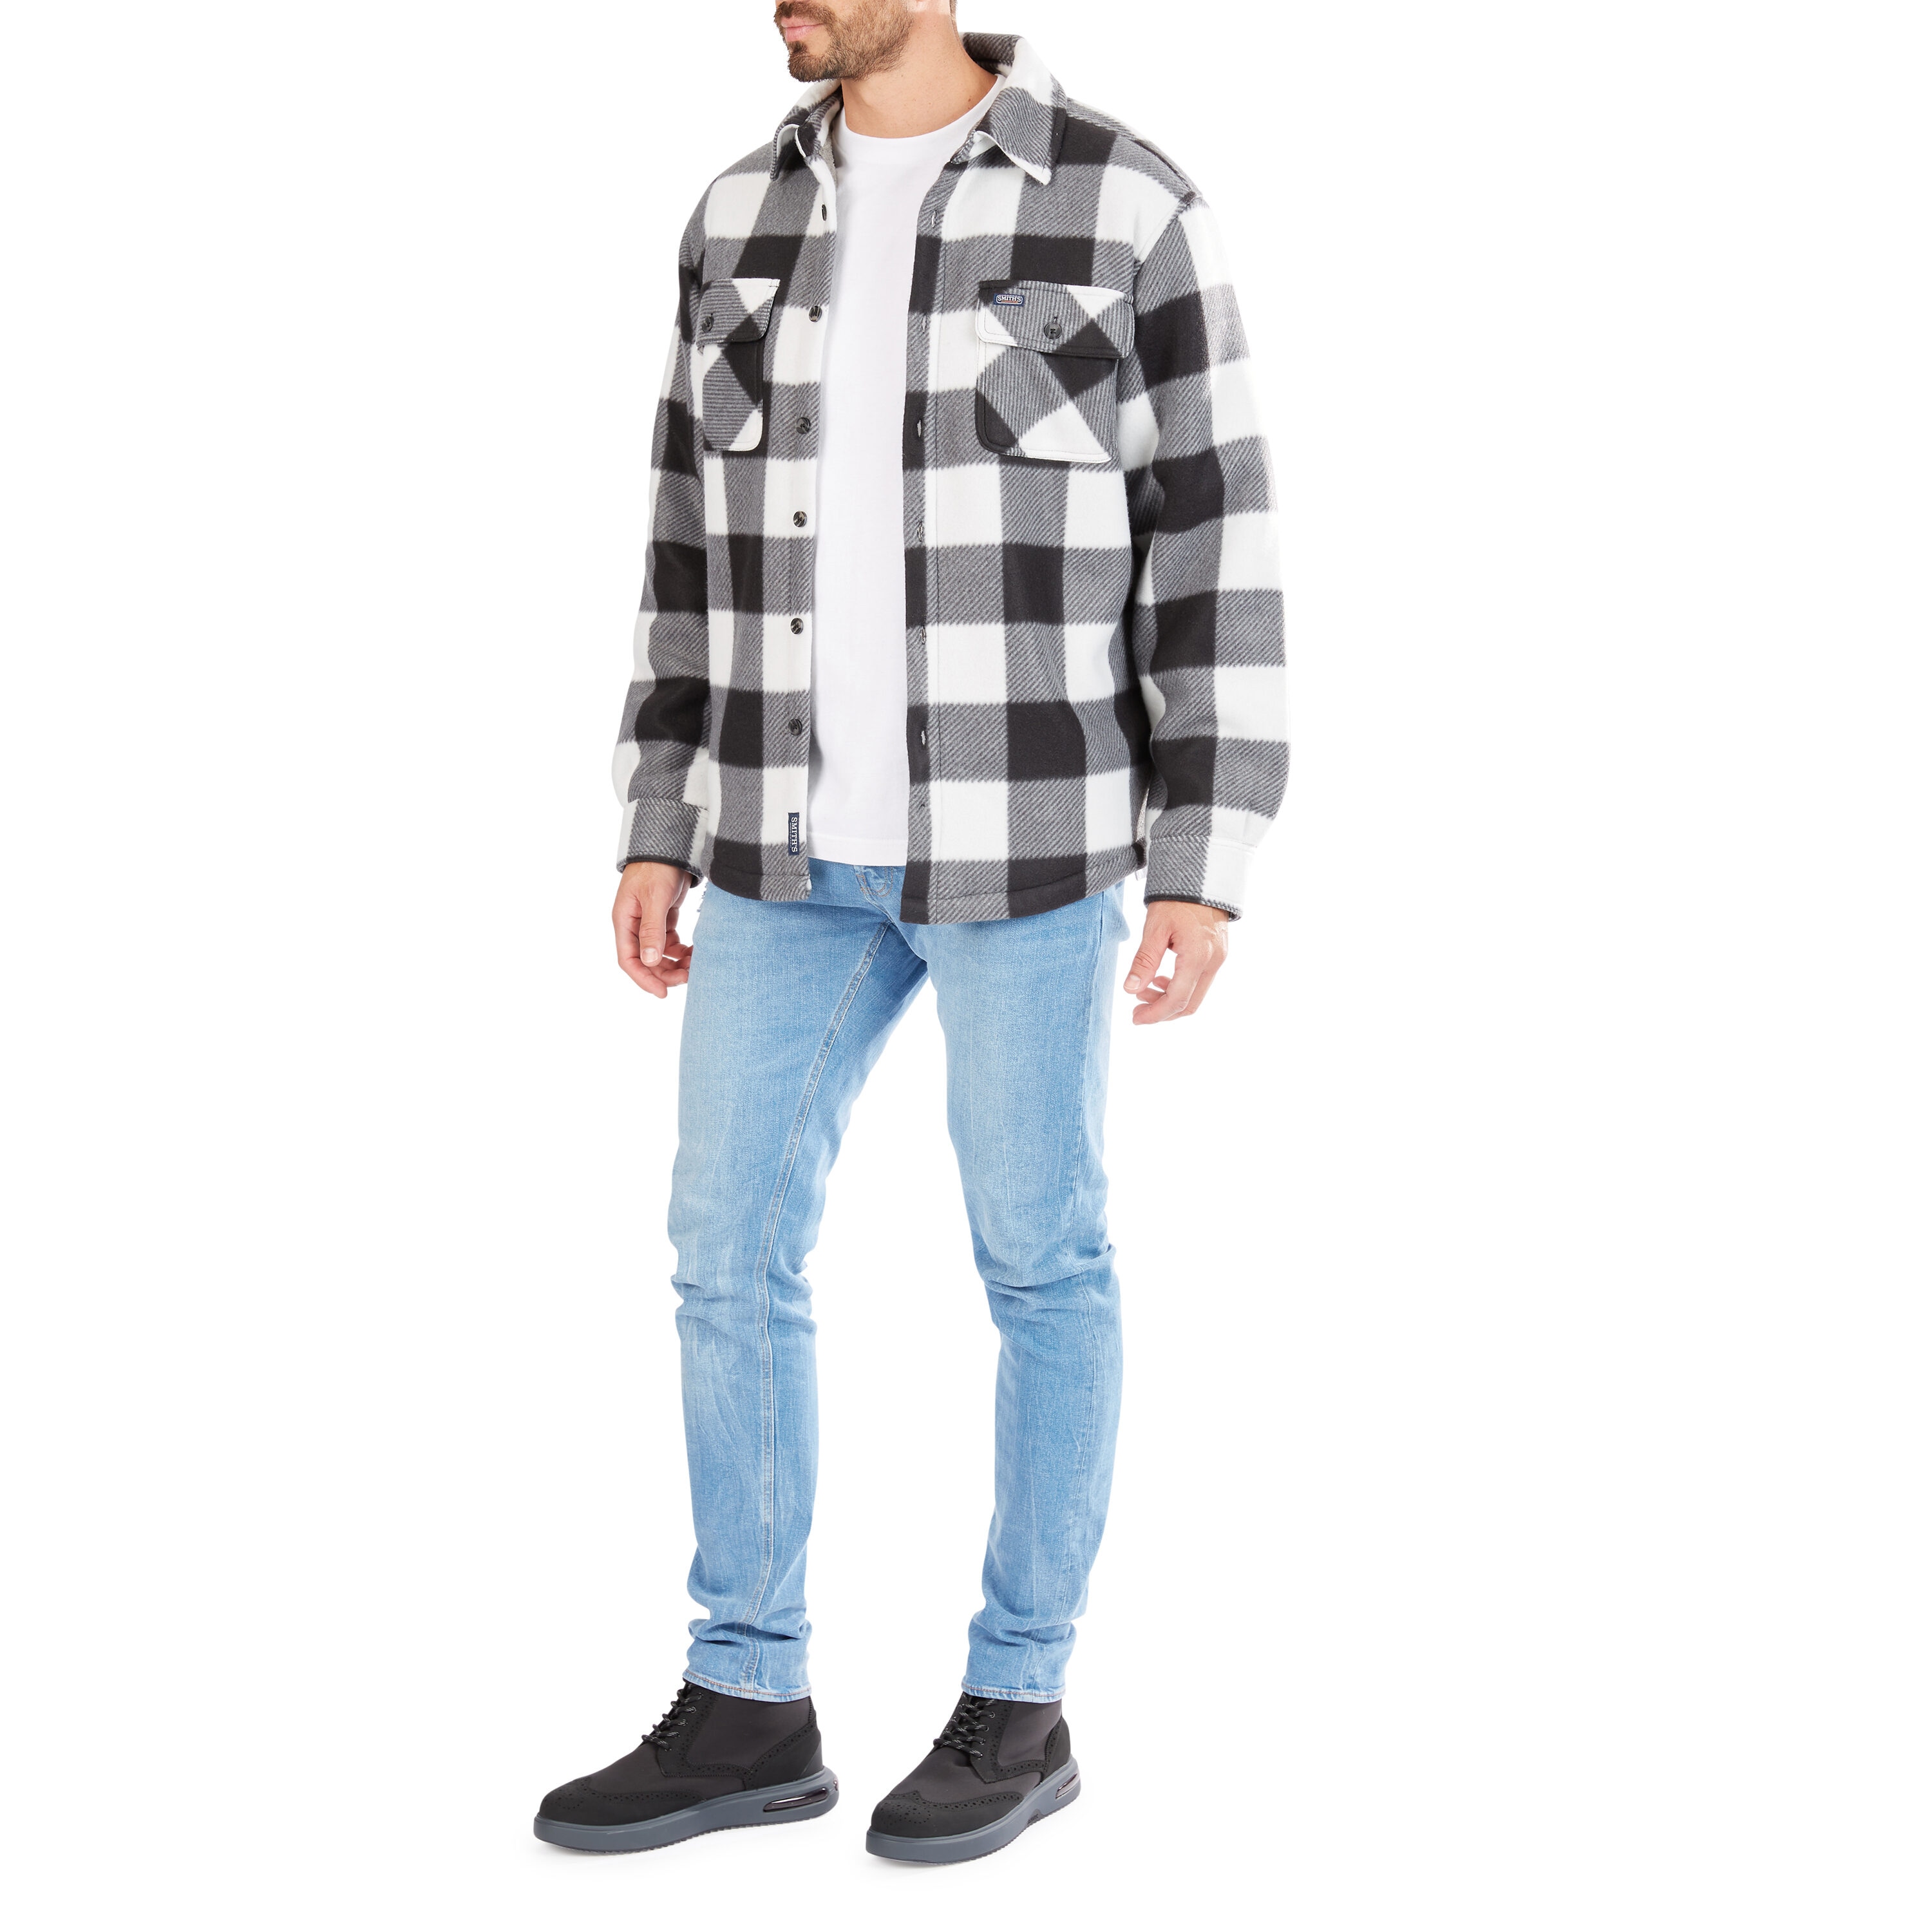 Smith's Workwear Sherpa-Lined Plaid Fleece Shirt Jacket in the